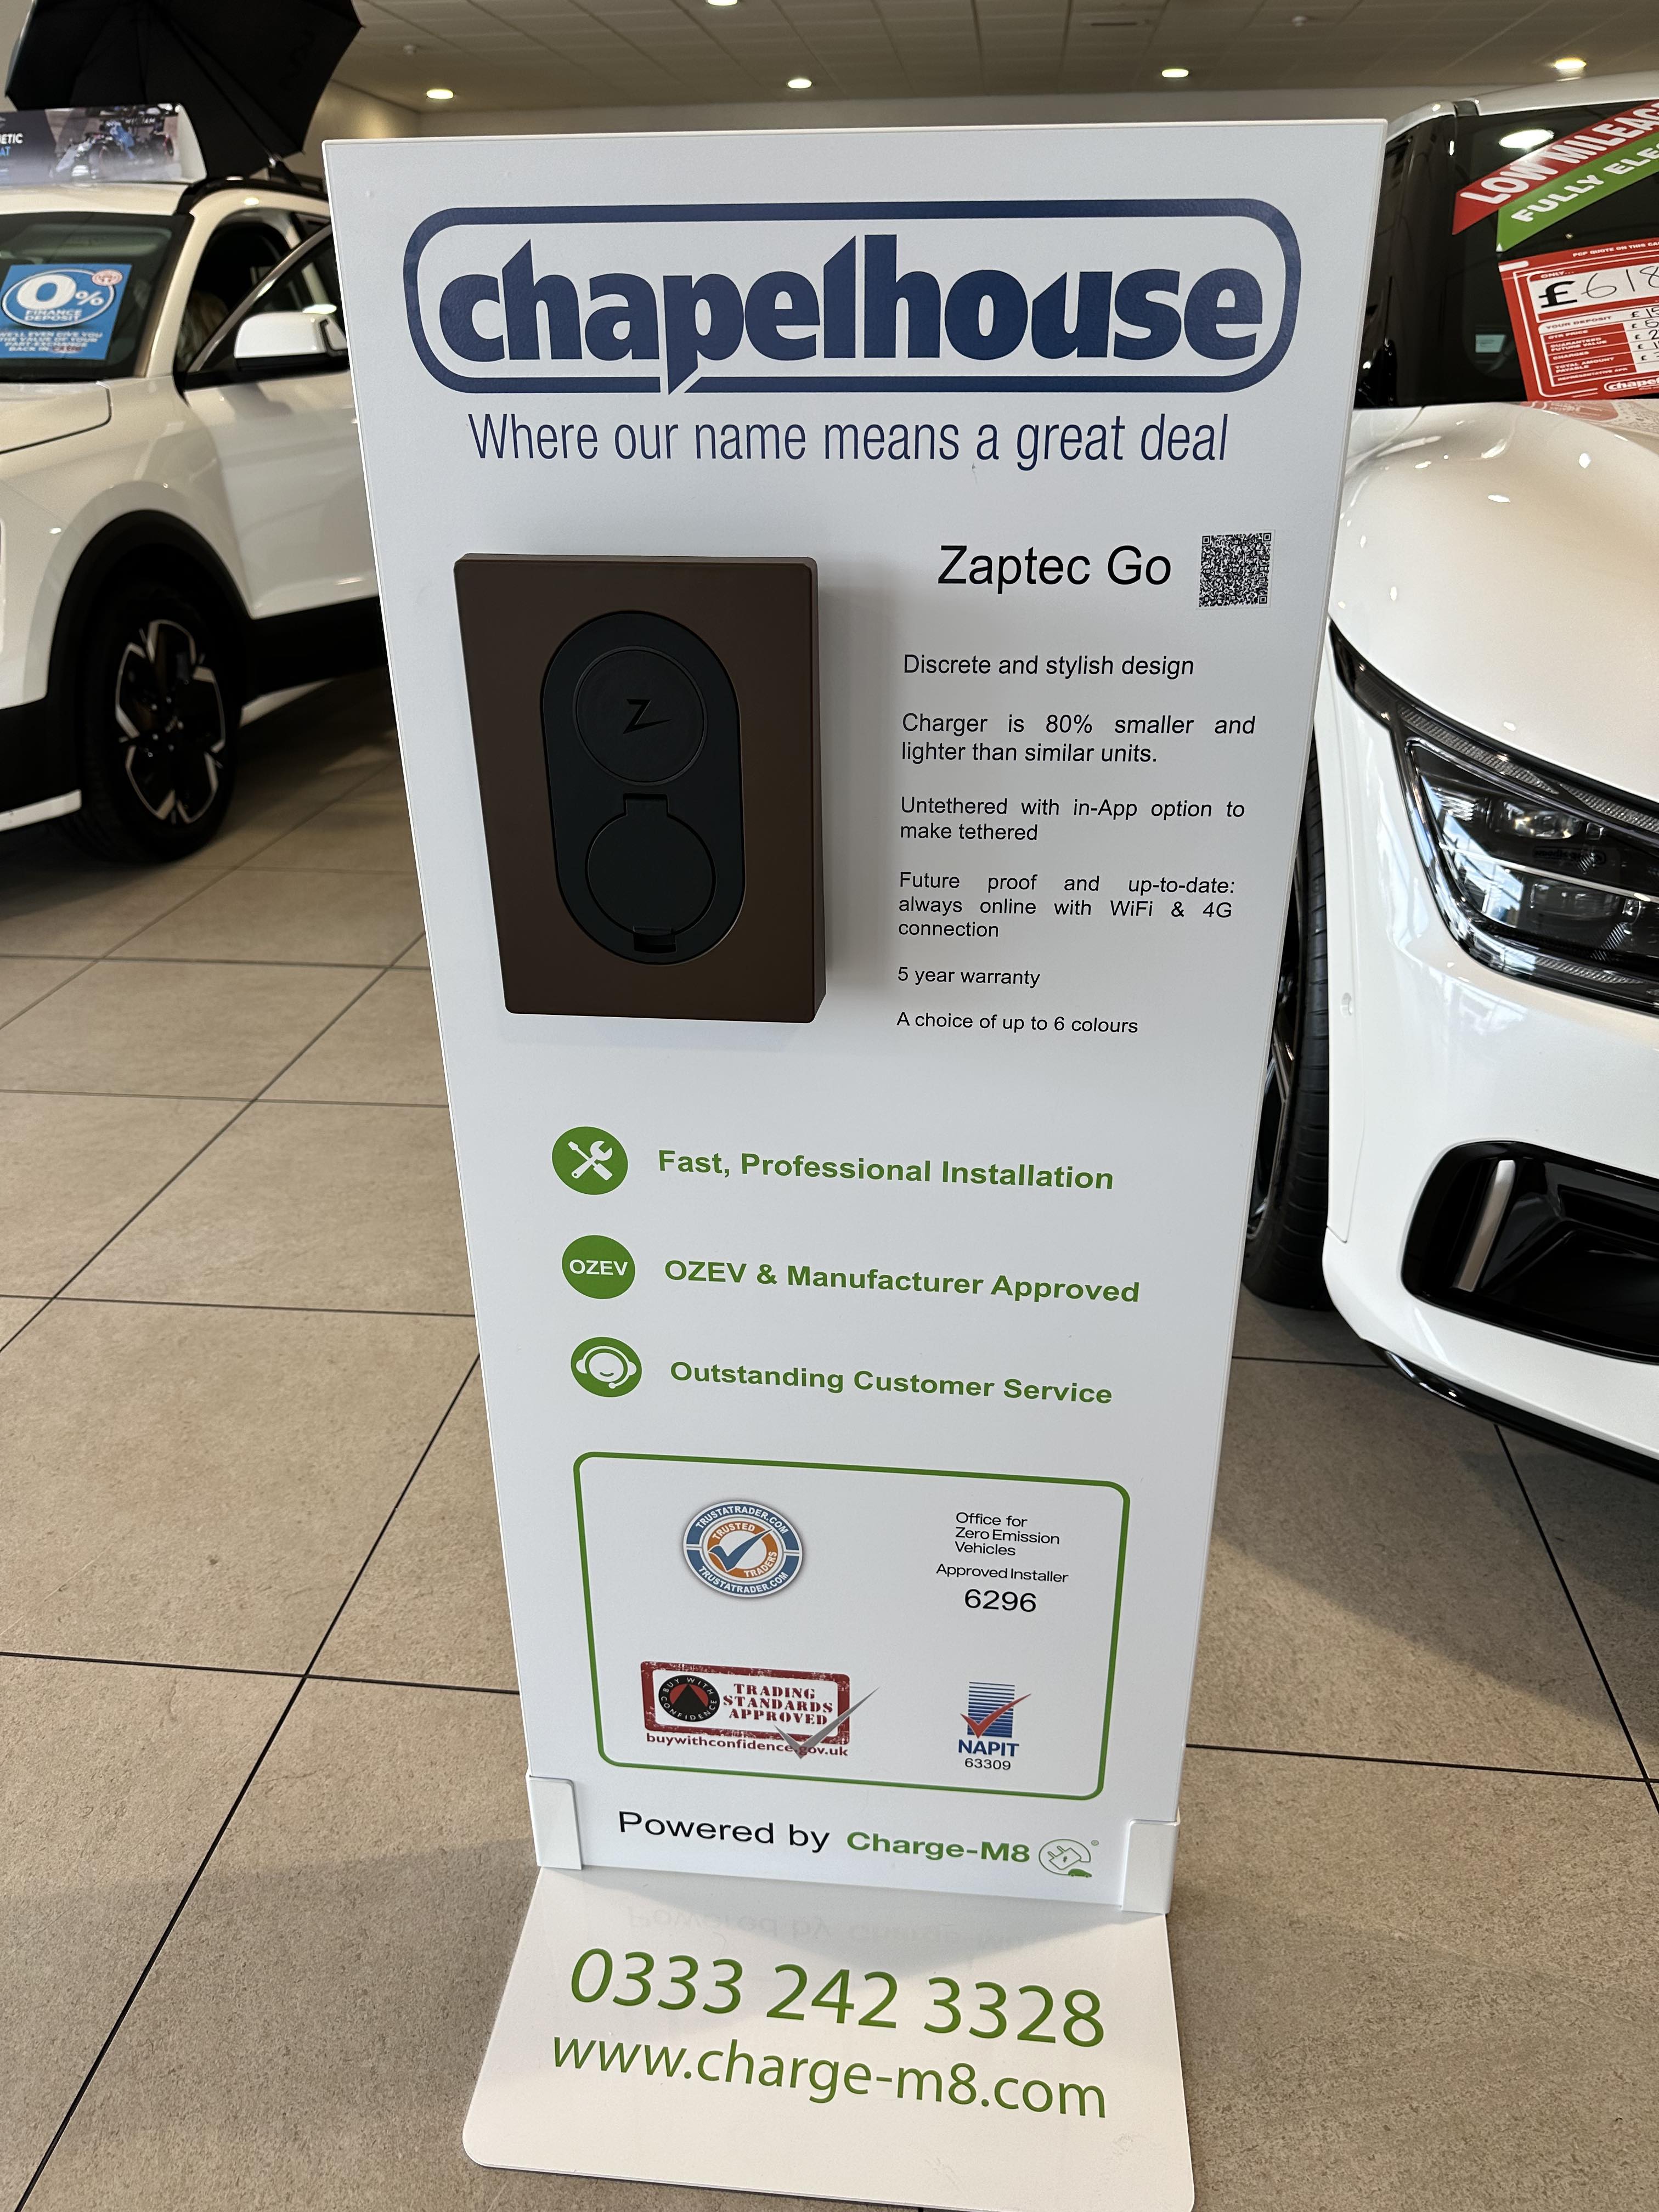 Charge-m8 announces partnership with Chapelhouse Motor Group